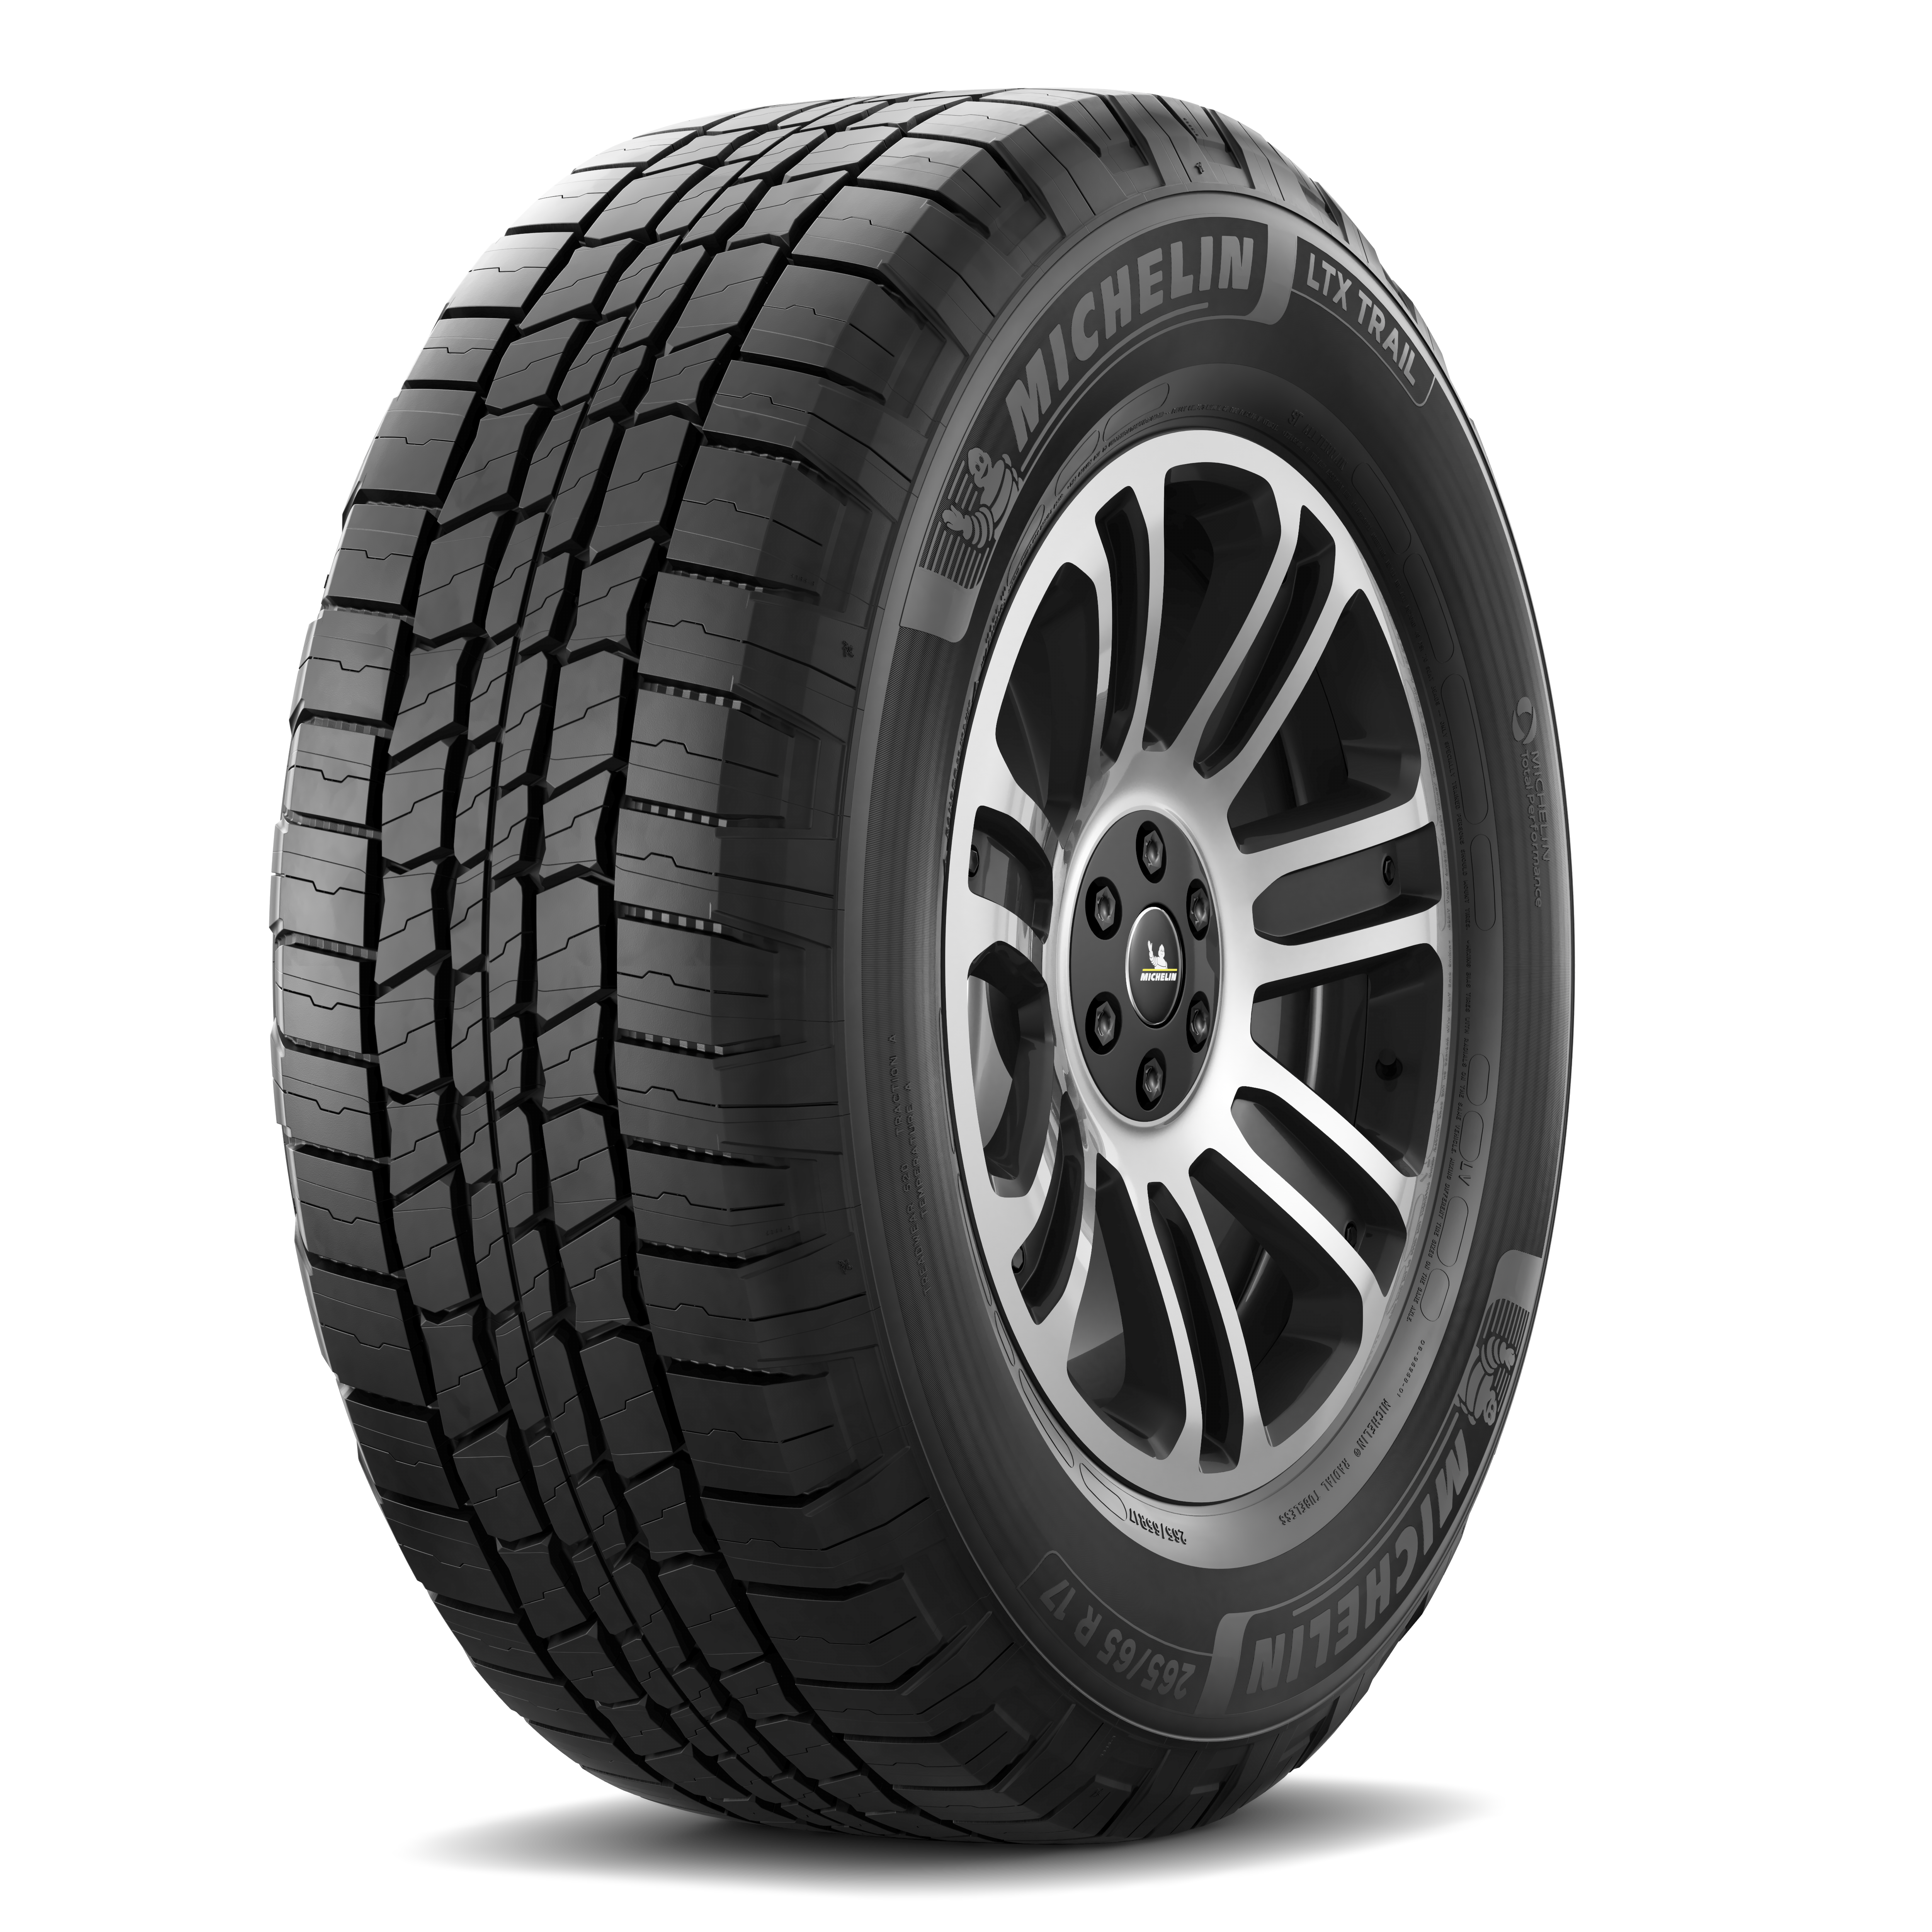 MICHELIN LTX TRAIL ST - Car Tyre | MICHELIN South Africa Official Website